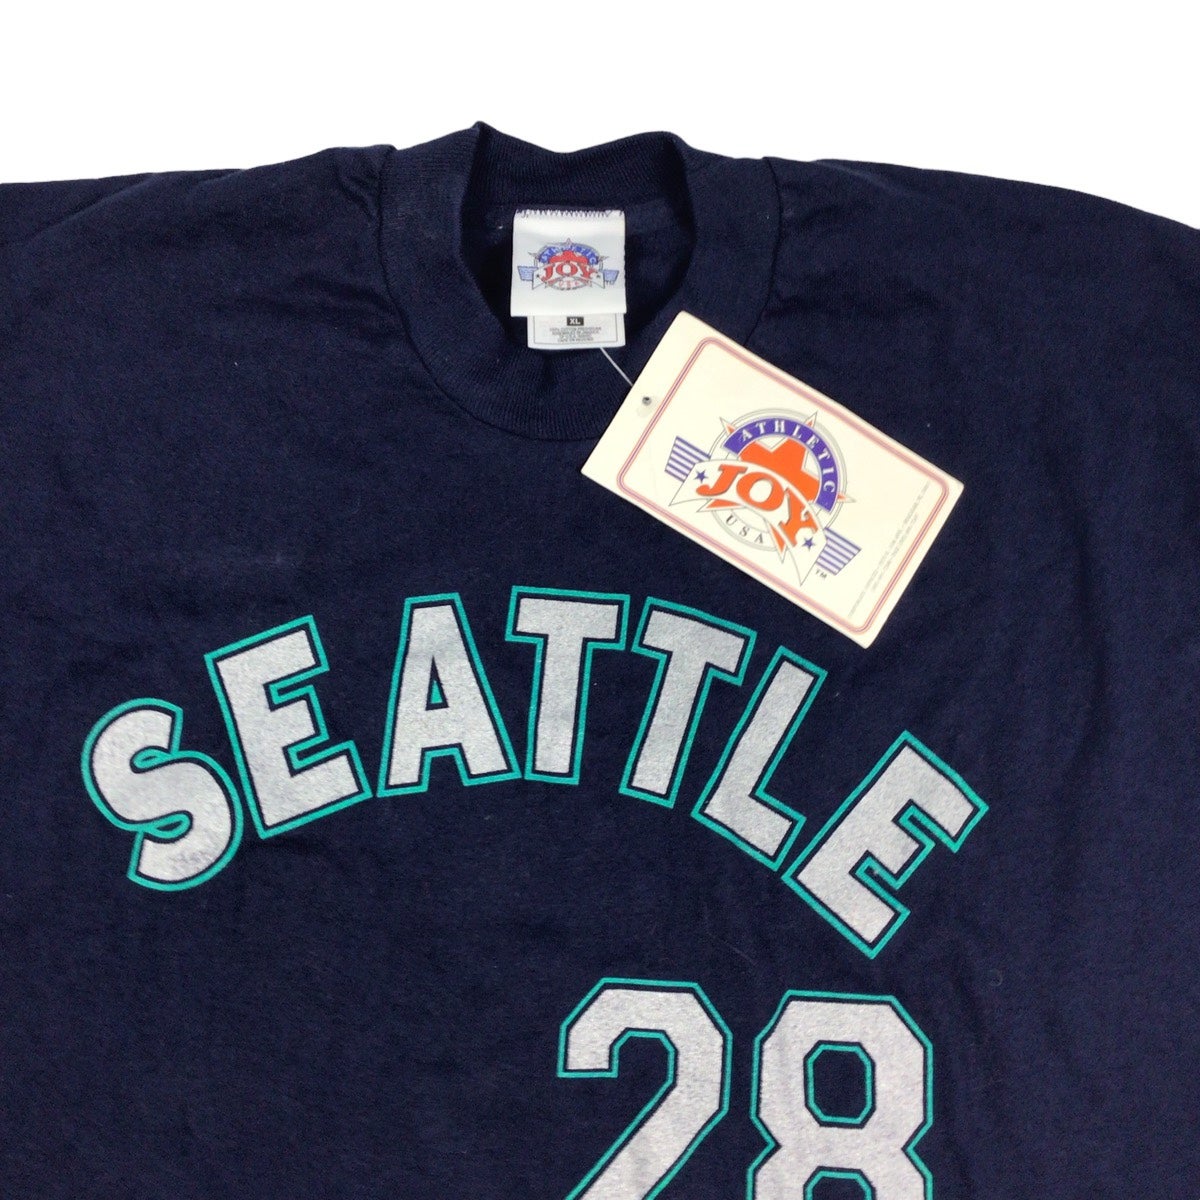 Vintage 90s Seattle Mariners MLB T-shirt. Dead stock, tag still on